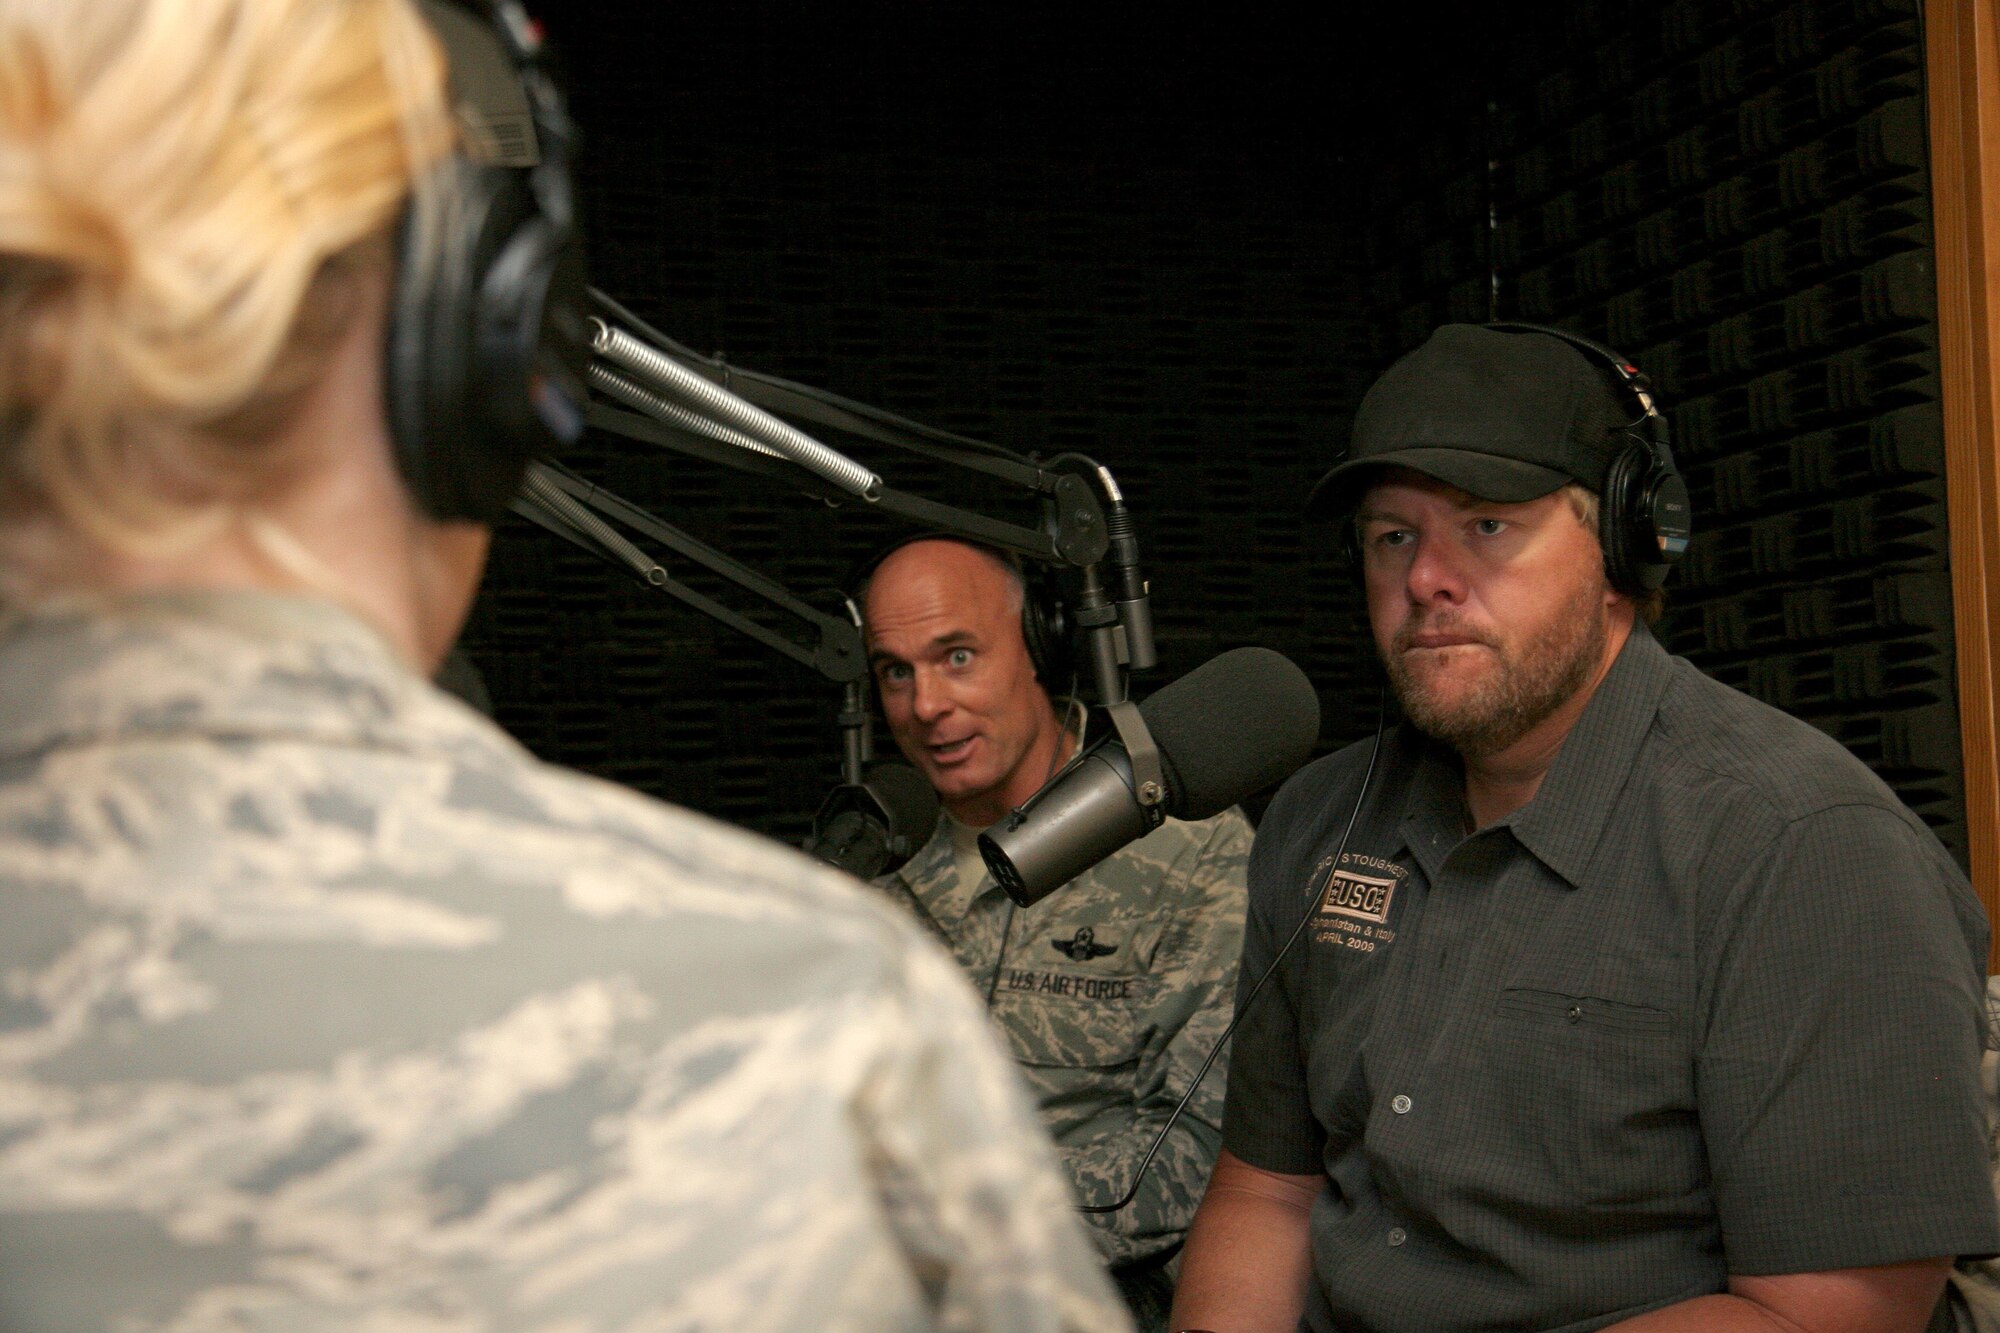 Brig. Gen. Craig Franklin, 31st Fighter Wing commander, and country music superstar Toby Keith, are interviewed by Senior Airman Caitlin Jones on American Forces Network Aviano's ZFM 106 morning show at Aviano Air Base, Italy, April 29.  Mr. Keith just returned from Afghanistan where he was entertaining the troops on his USO sponsored "America's Toughest Tour 2009".  He stopped by Aviano before continuing the tour with a concert at Camp Darby, Italy, April 29 and U.S. Army Garrison Vicenza, Italy April 30.  (U.S. Air Force photo/Senior Master Sgt. Robert W. Valenca) 